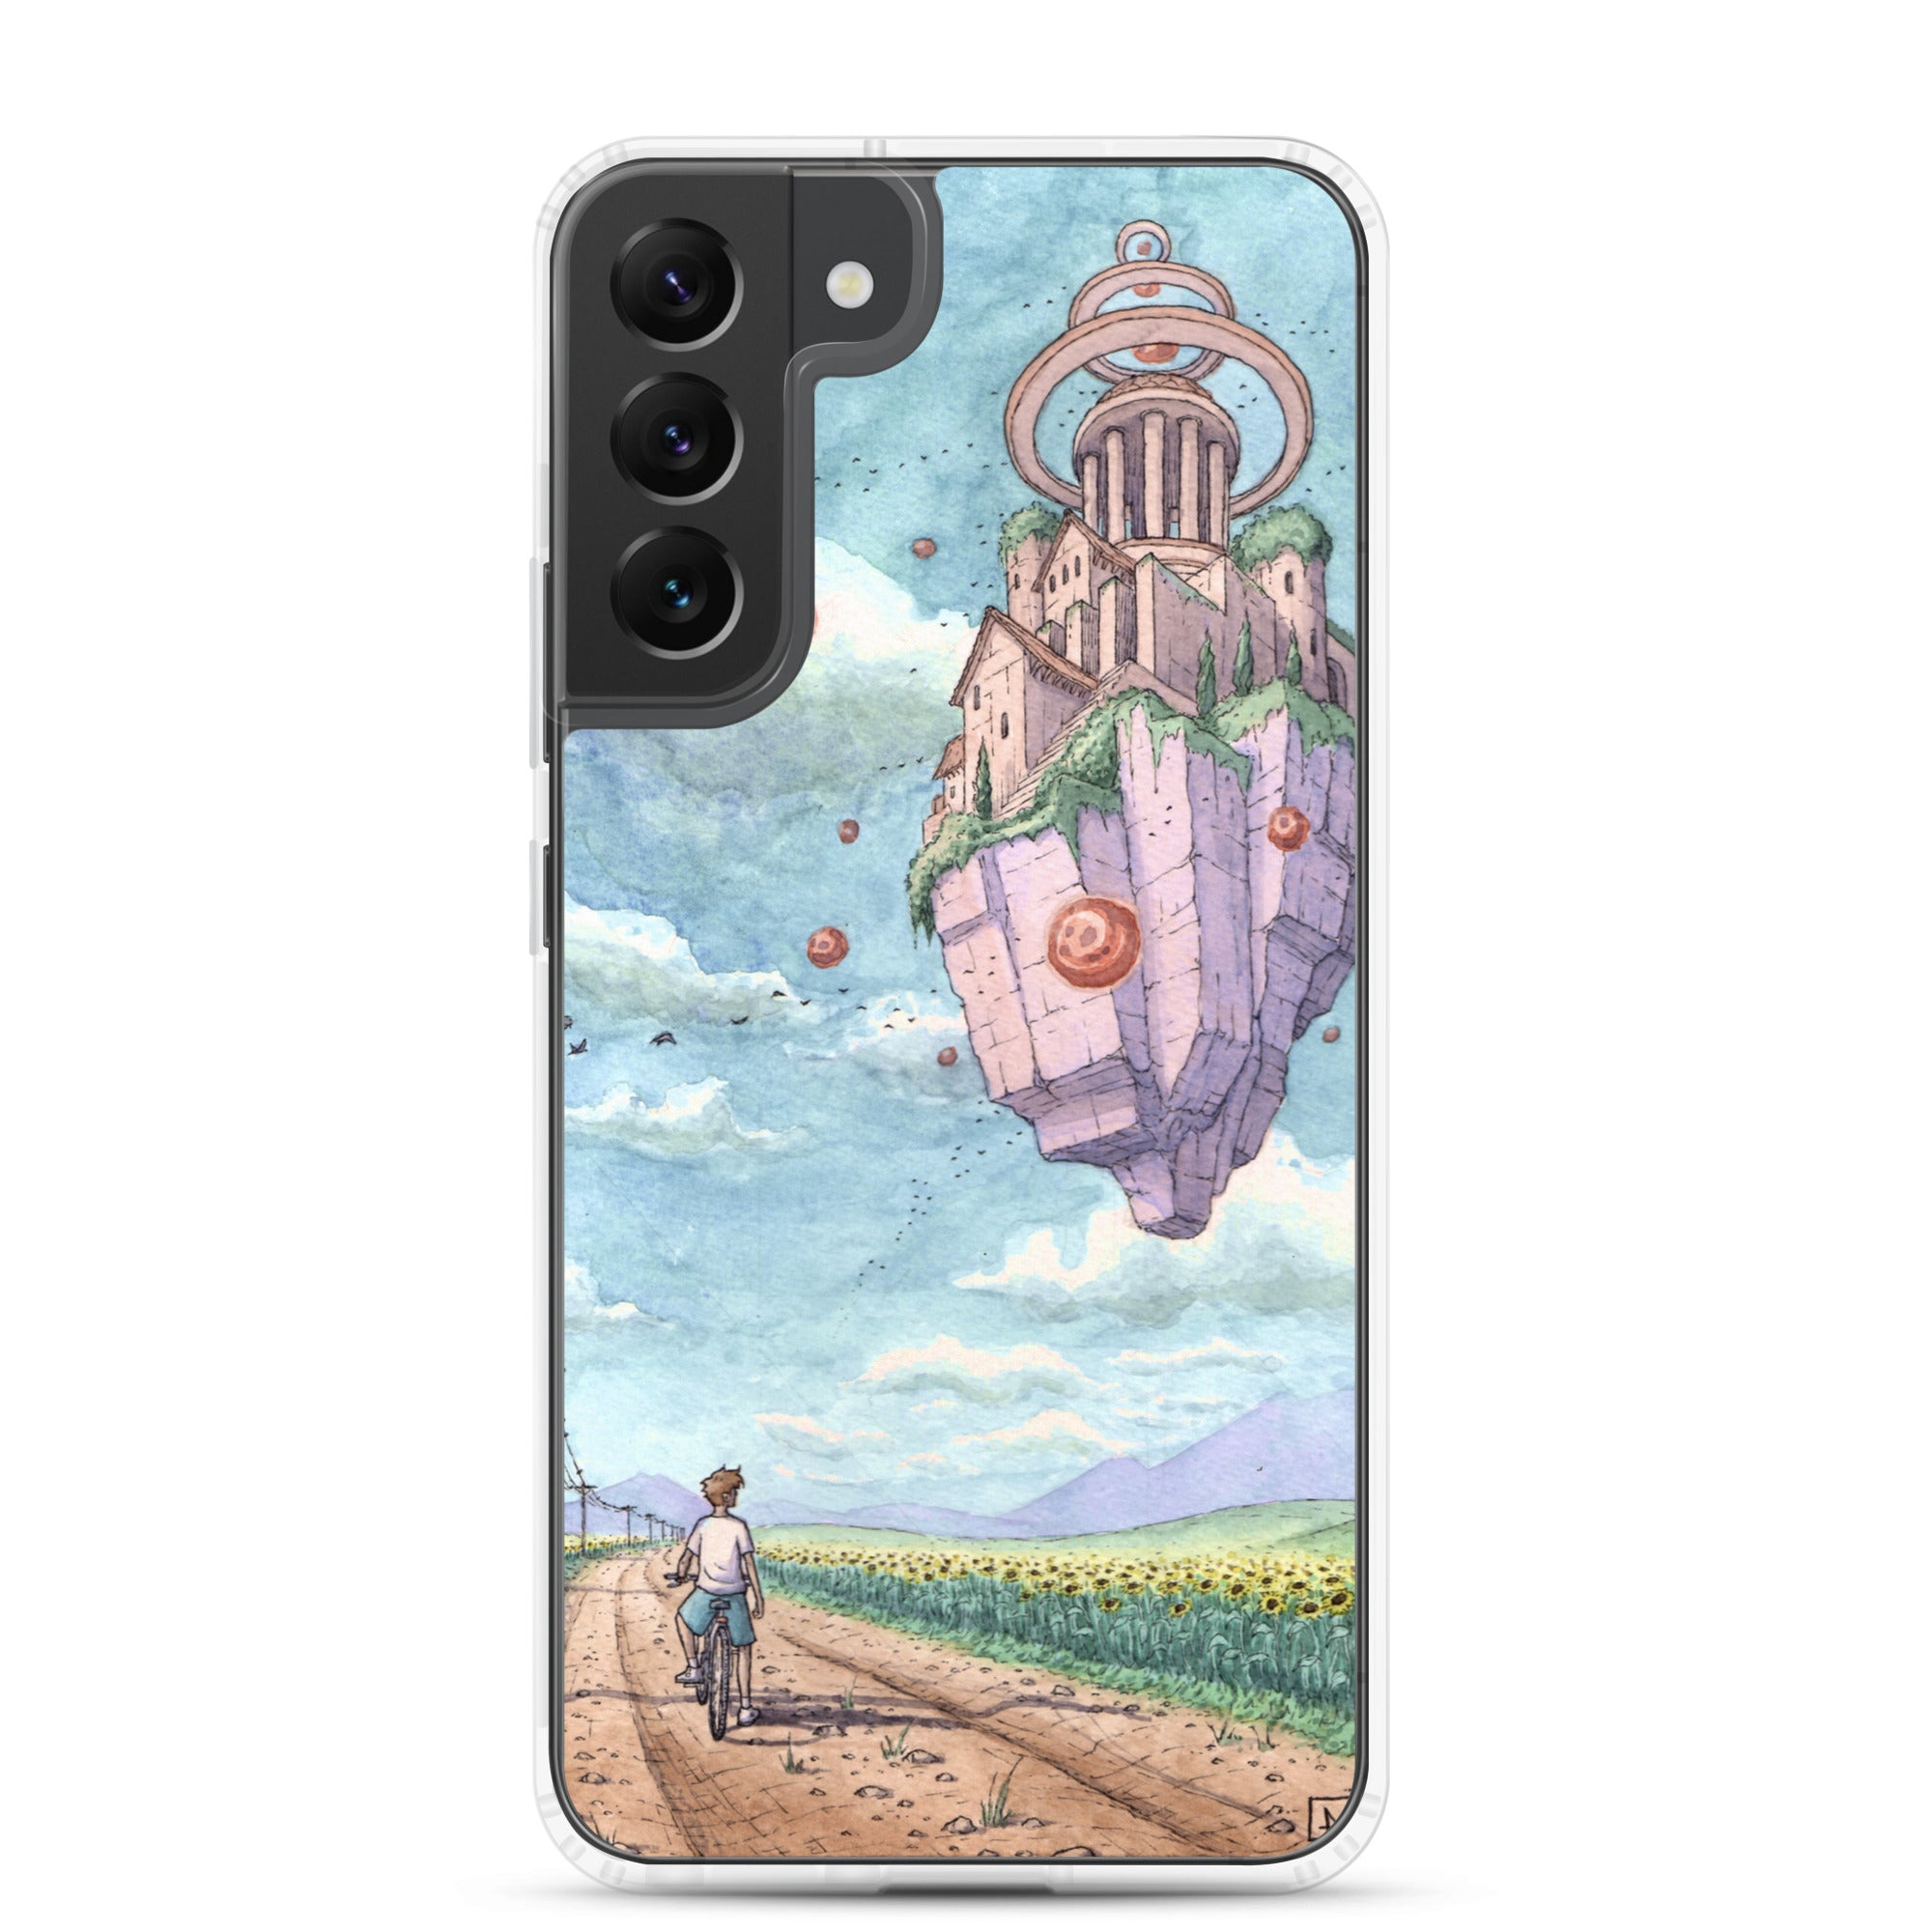 Clear Samsung Case - The Temple